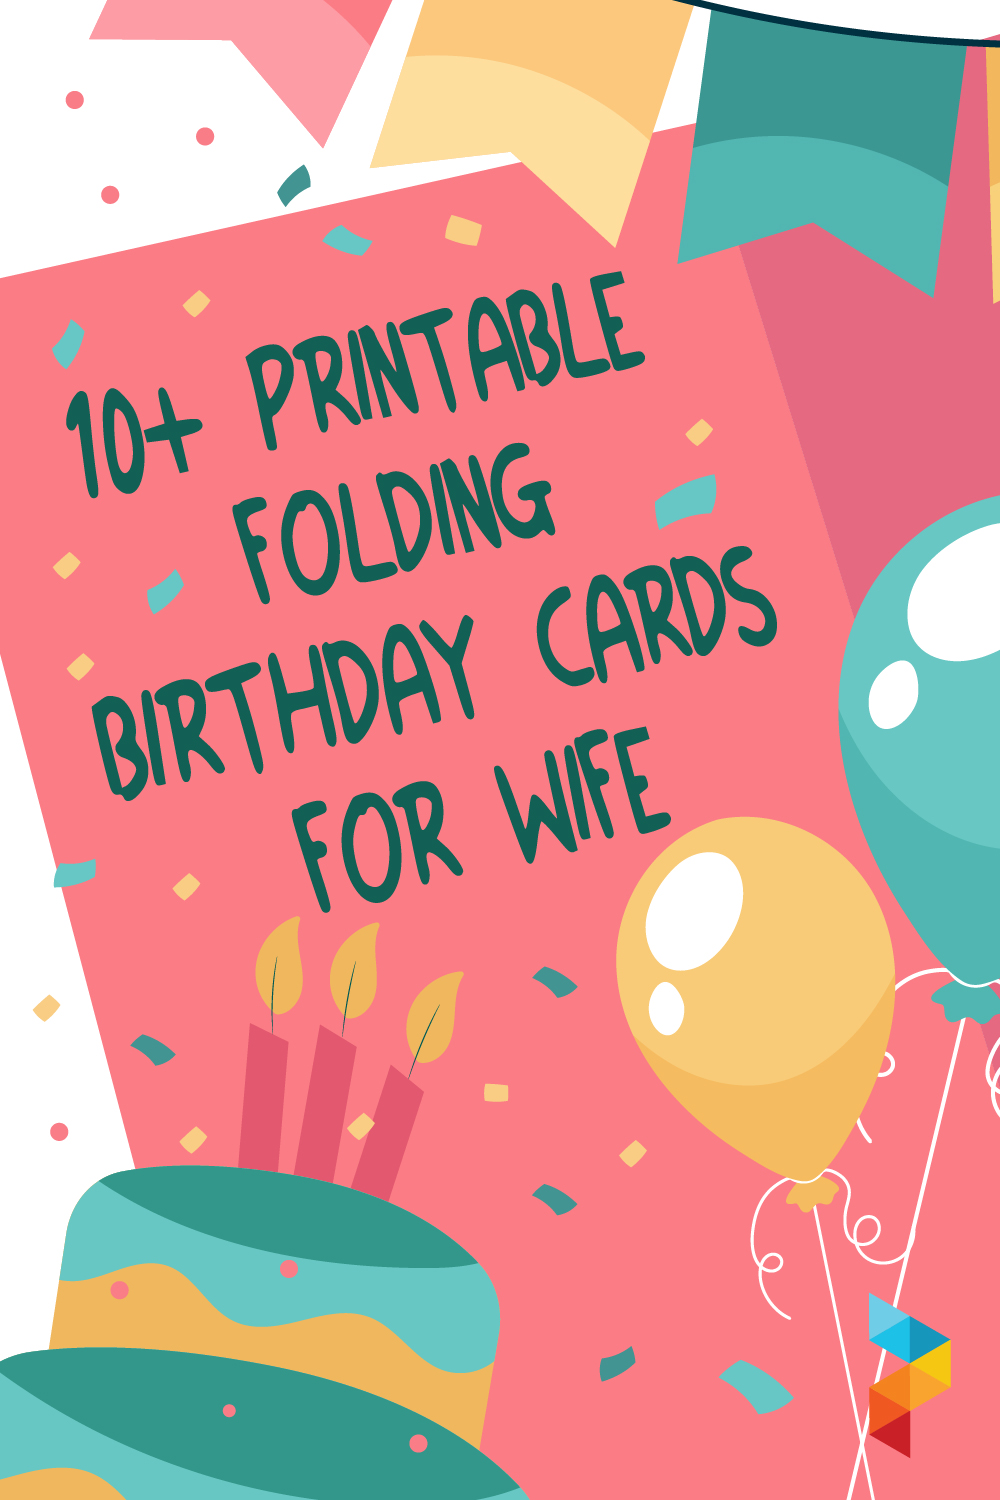 Folding Birthday Cards For Wife